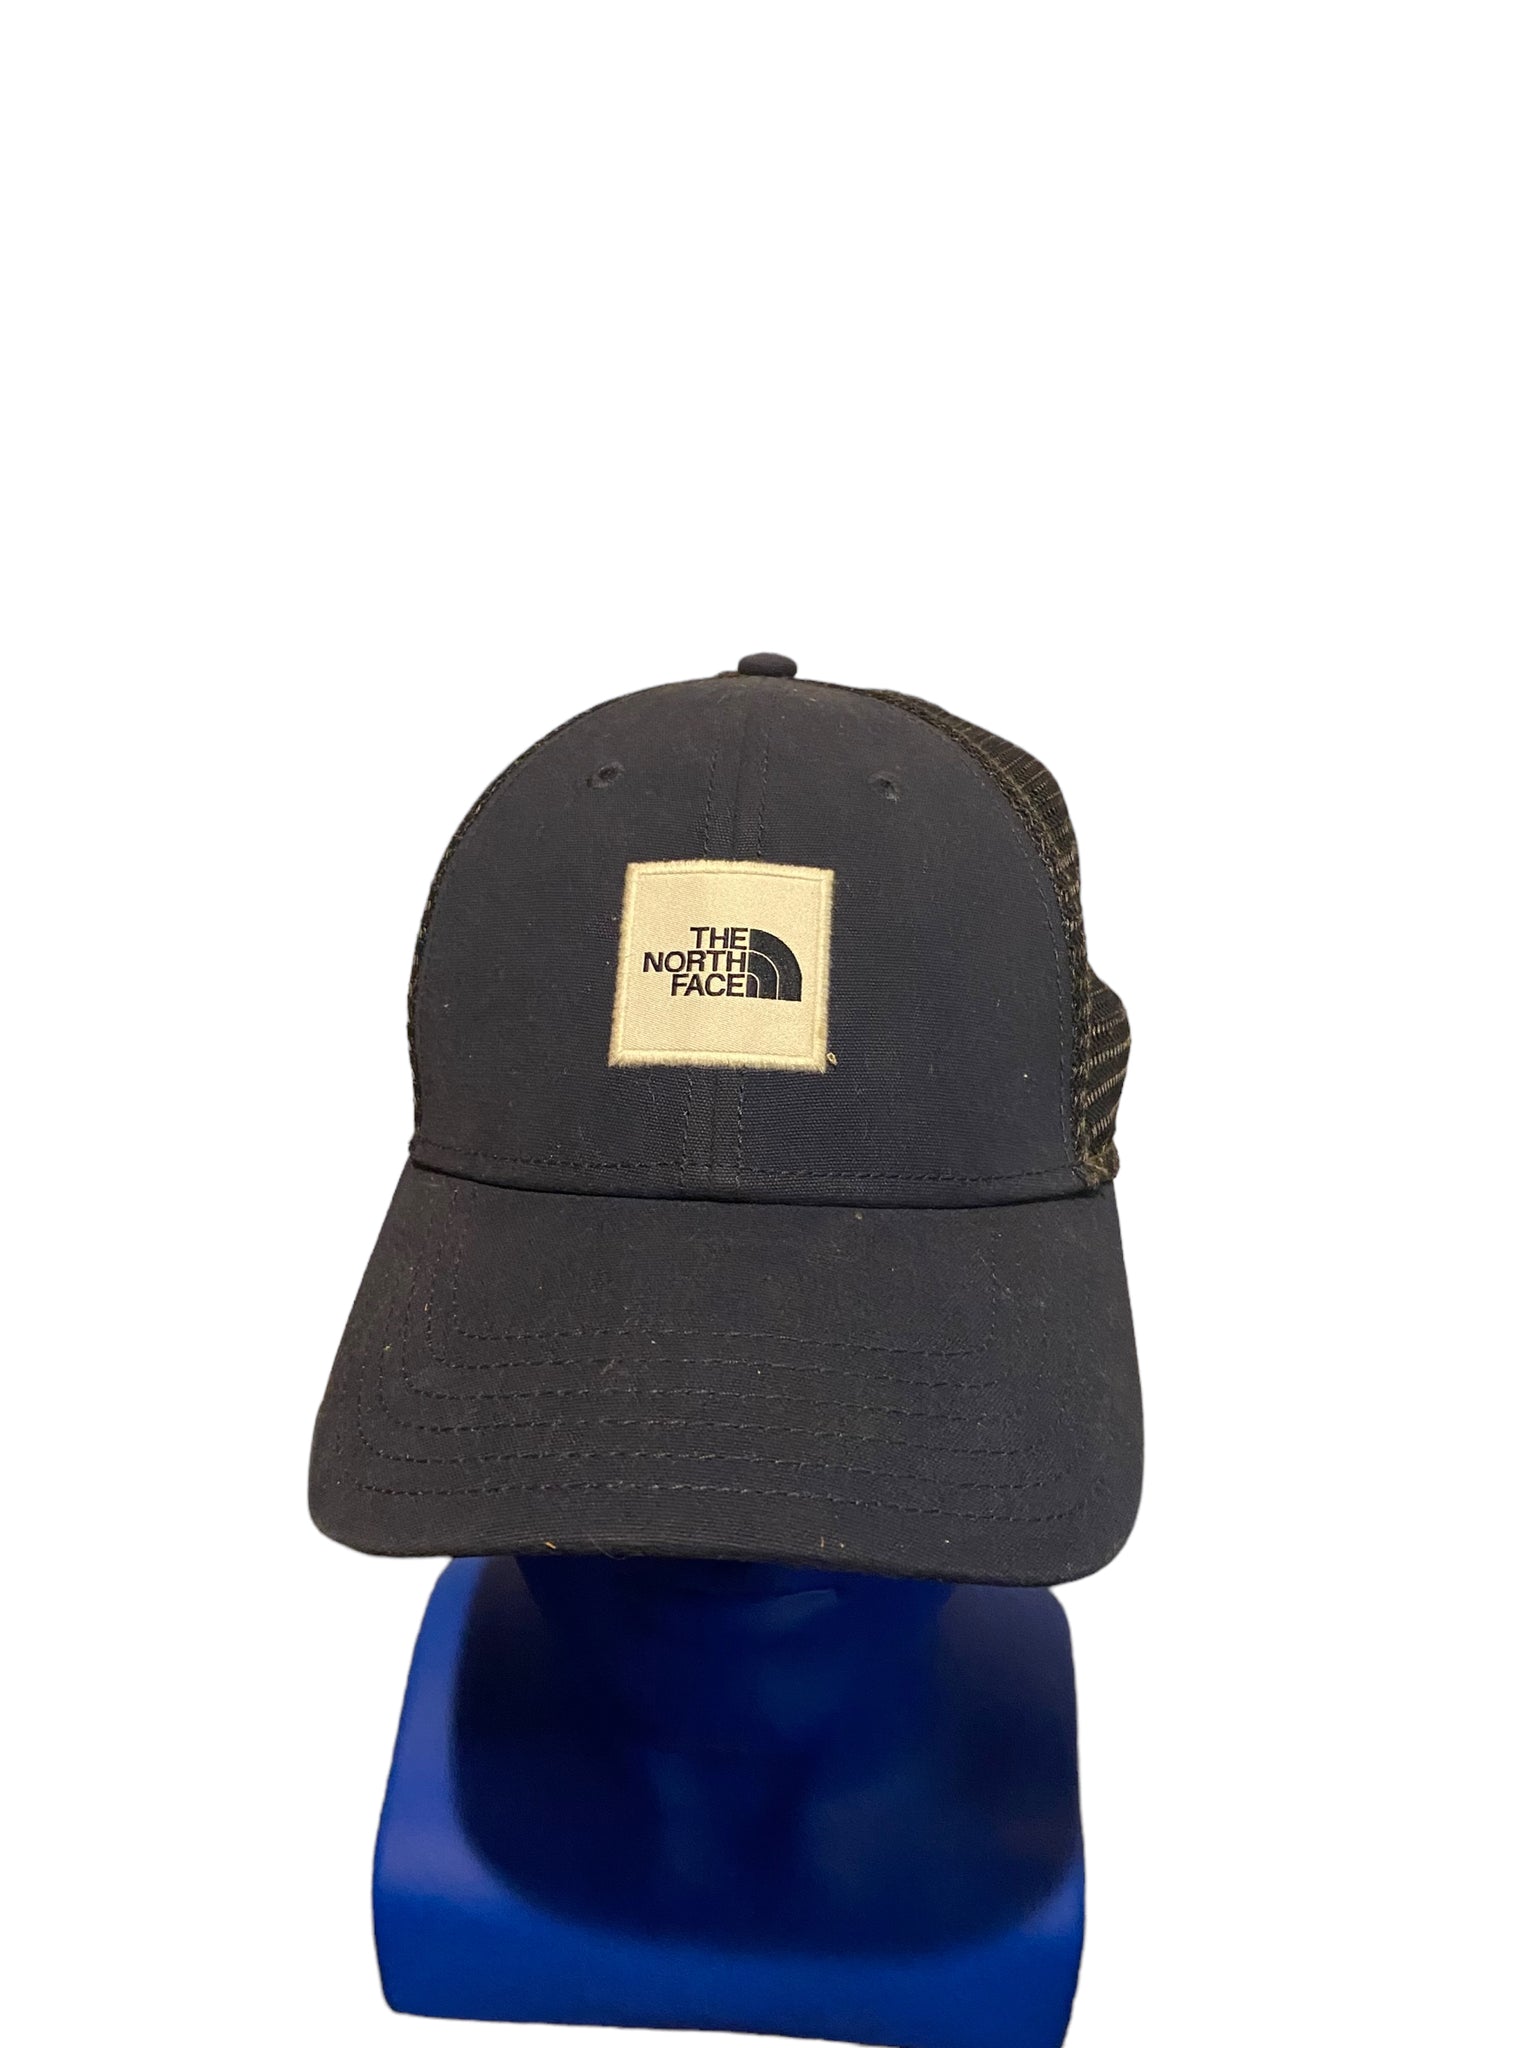 The North Face Box Logo Trucker Hat with Graphic Patch Snapback Dark Blue